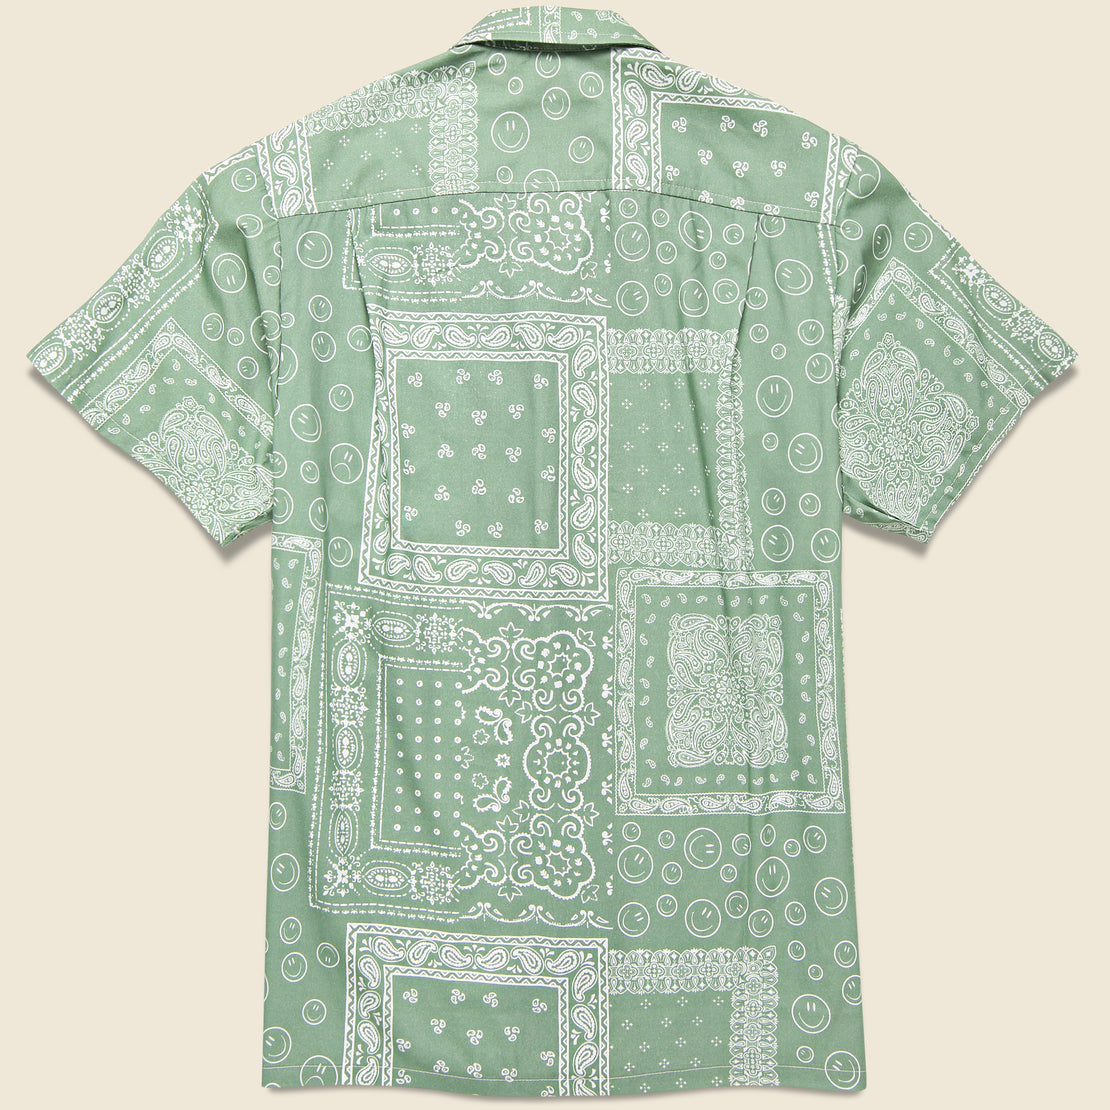 Bandana Print Camp Shirt - Sage - Bather - STAG Provisions - Tops - S/S Woven - Other Pattern